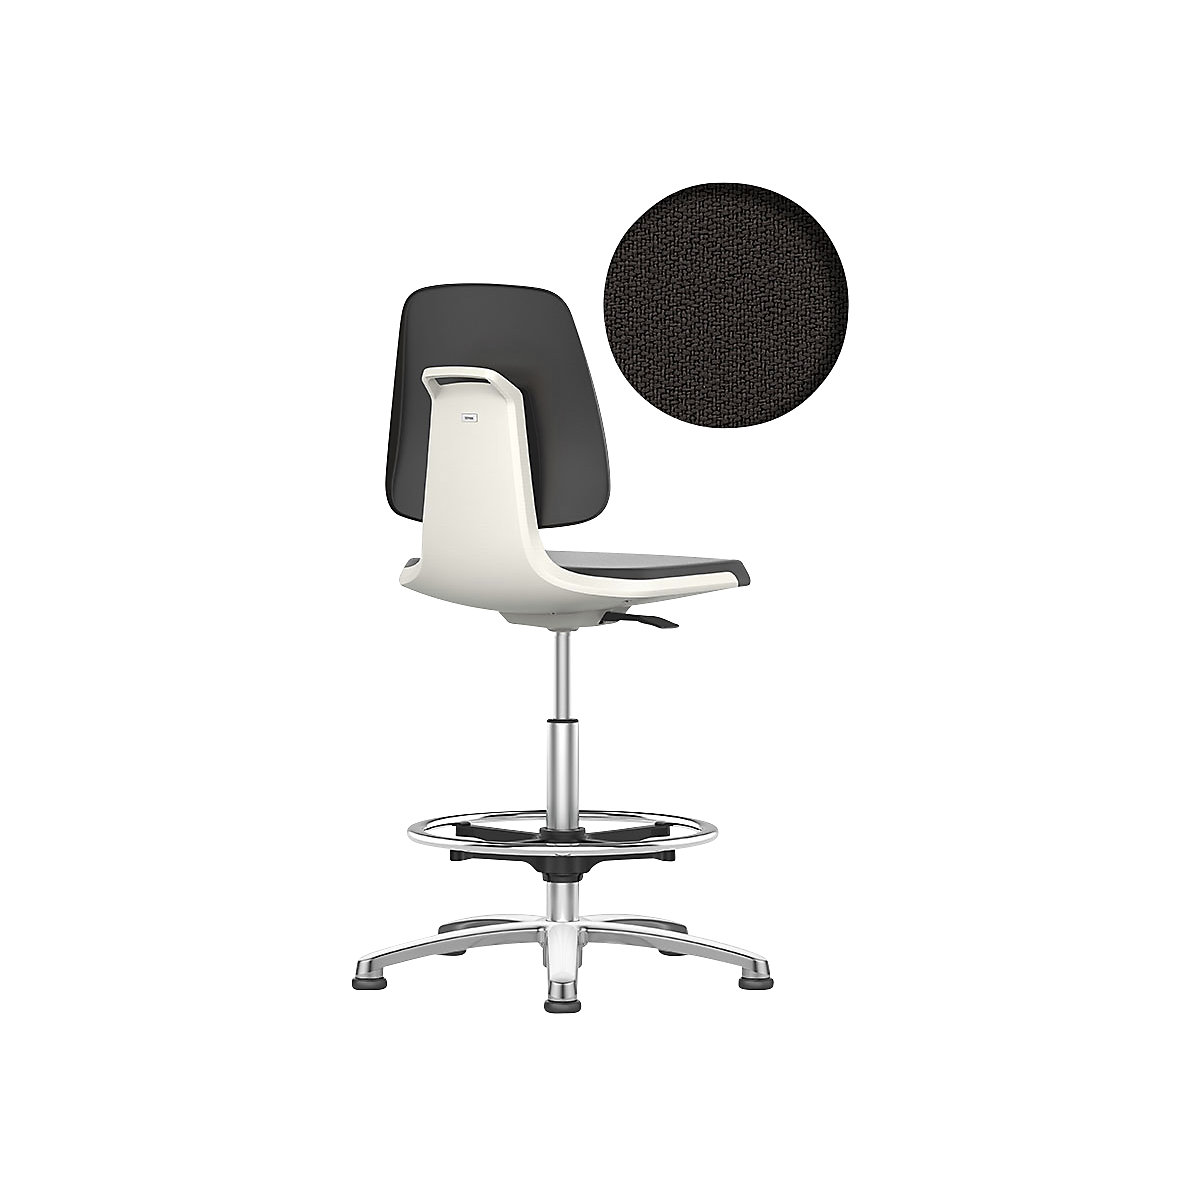 LABSIT industrial swivel chair – bimos, with floor glides and foot ring, fabric upholstered seat, white-25